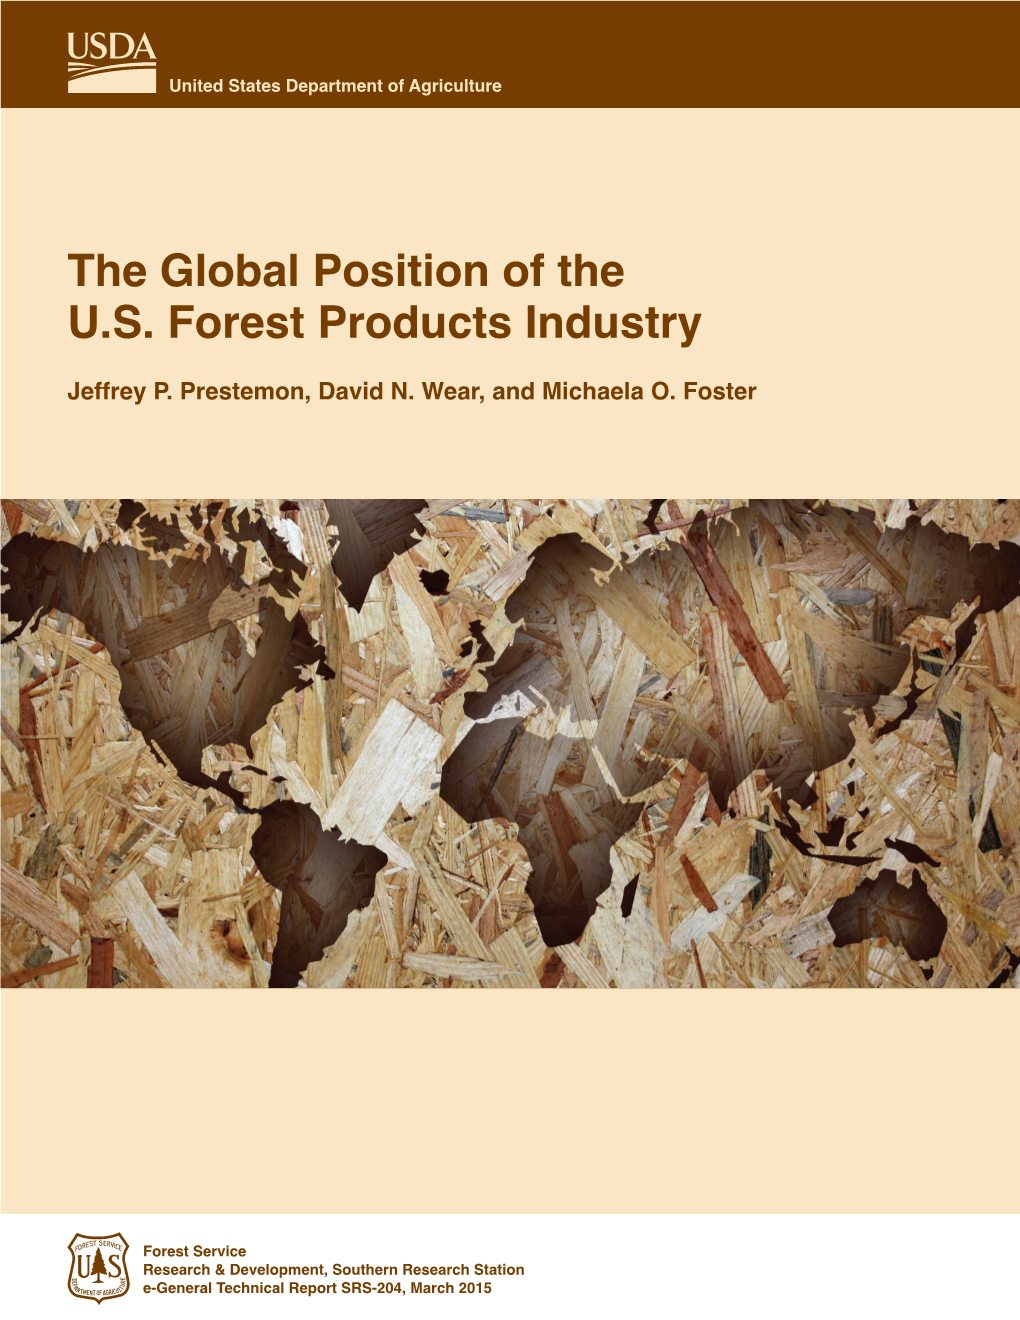 The Global Position of the U.S. Forest Products Industry